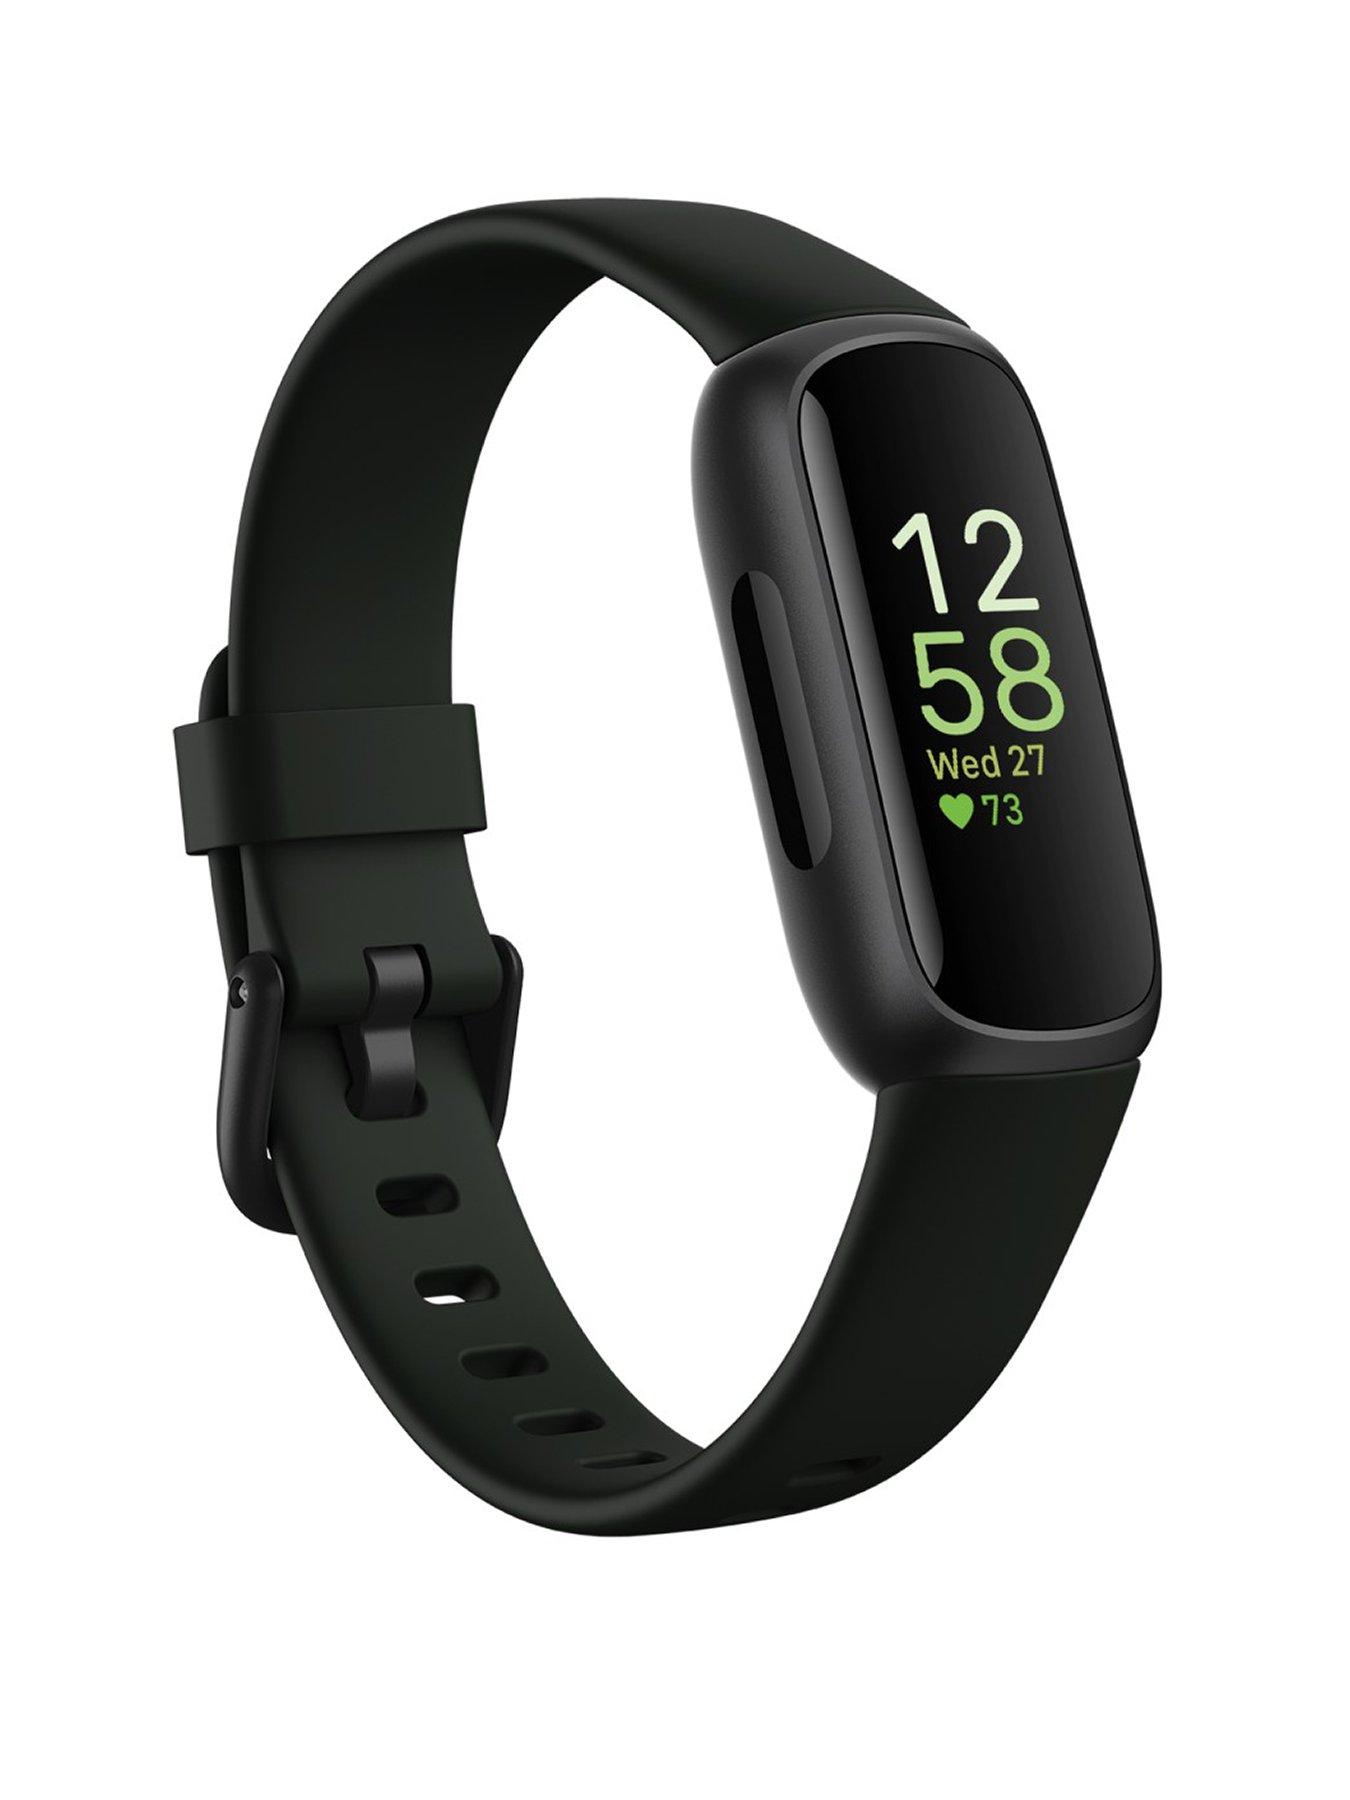 HUAWEI Band 6 review: Going toe-to-toe with Xiaomi - Android Authority